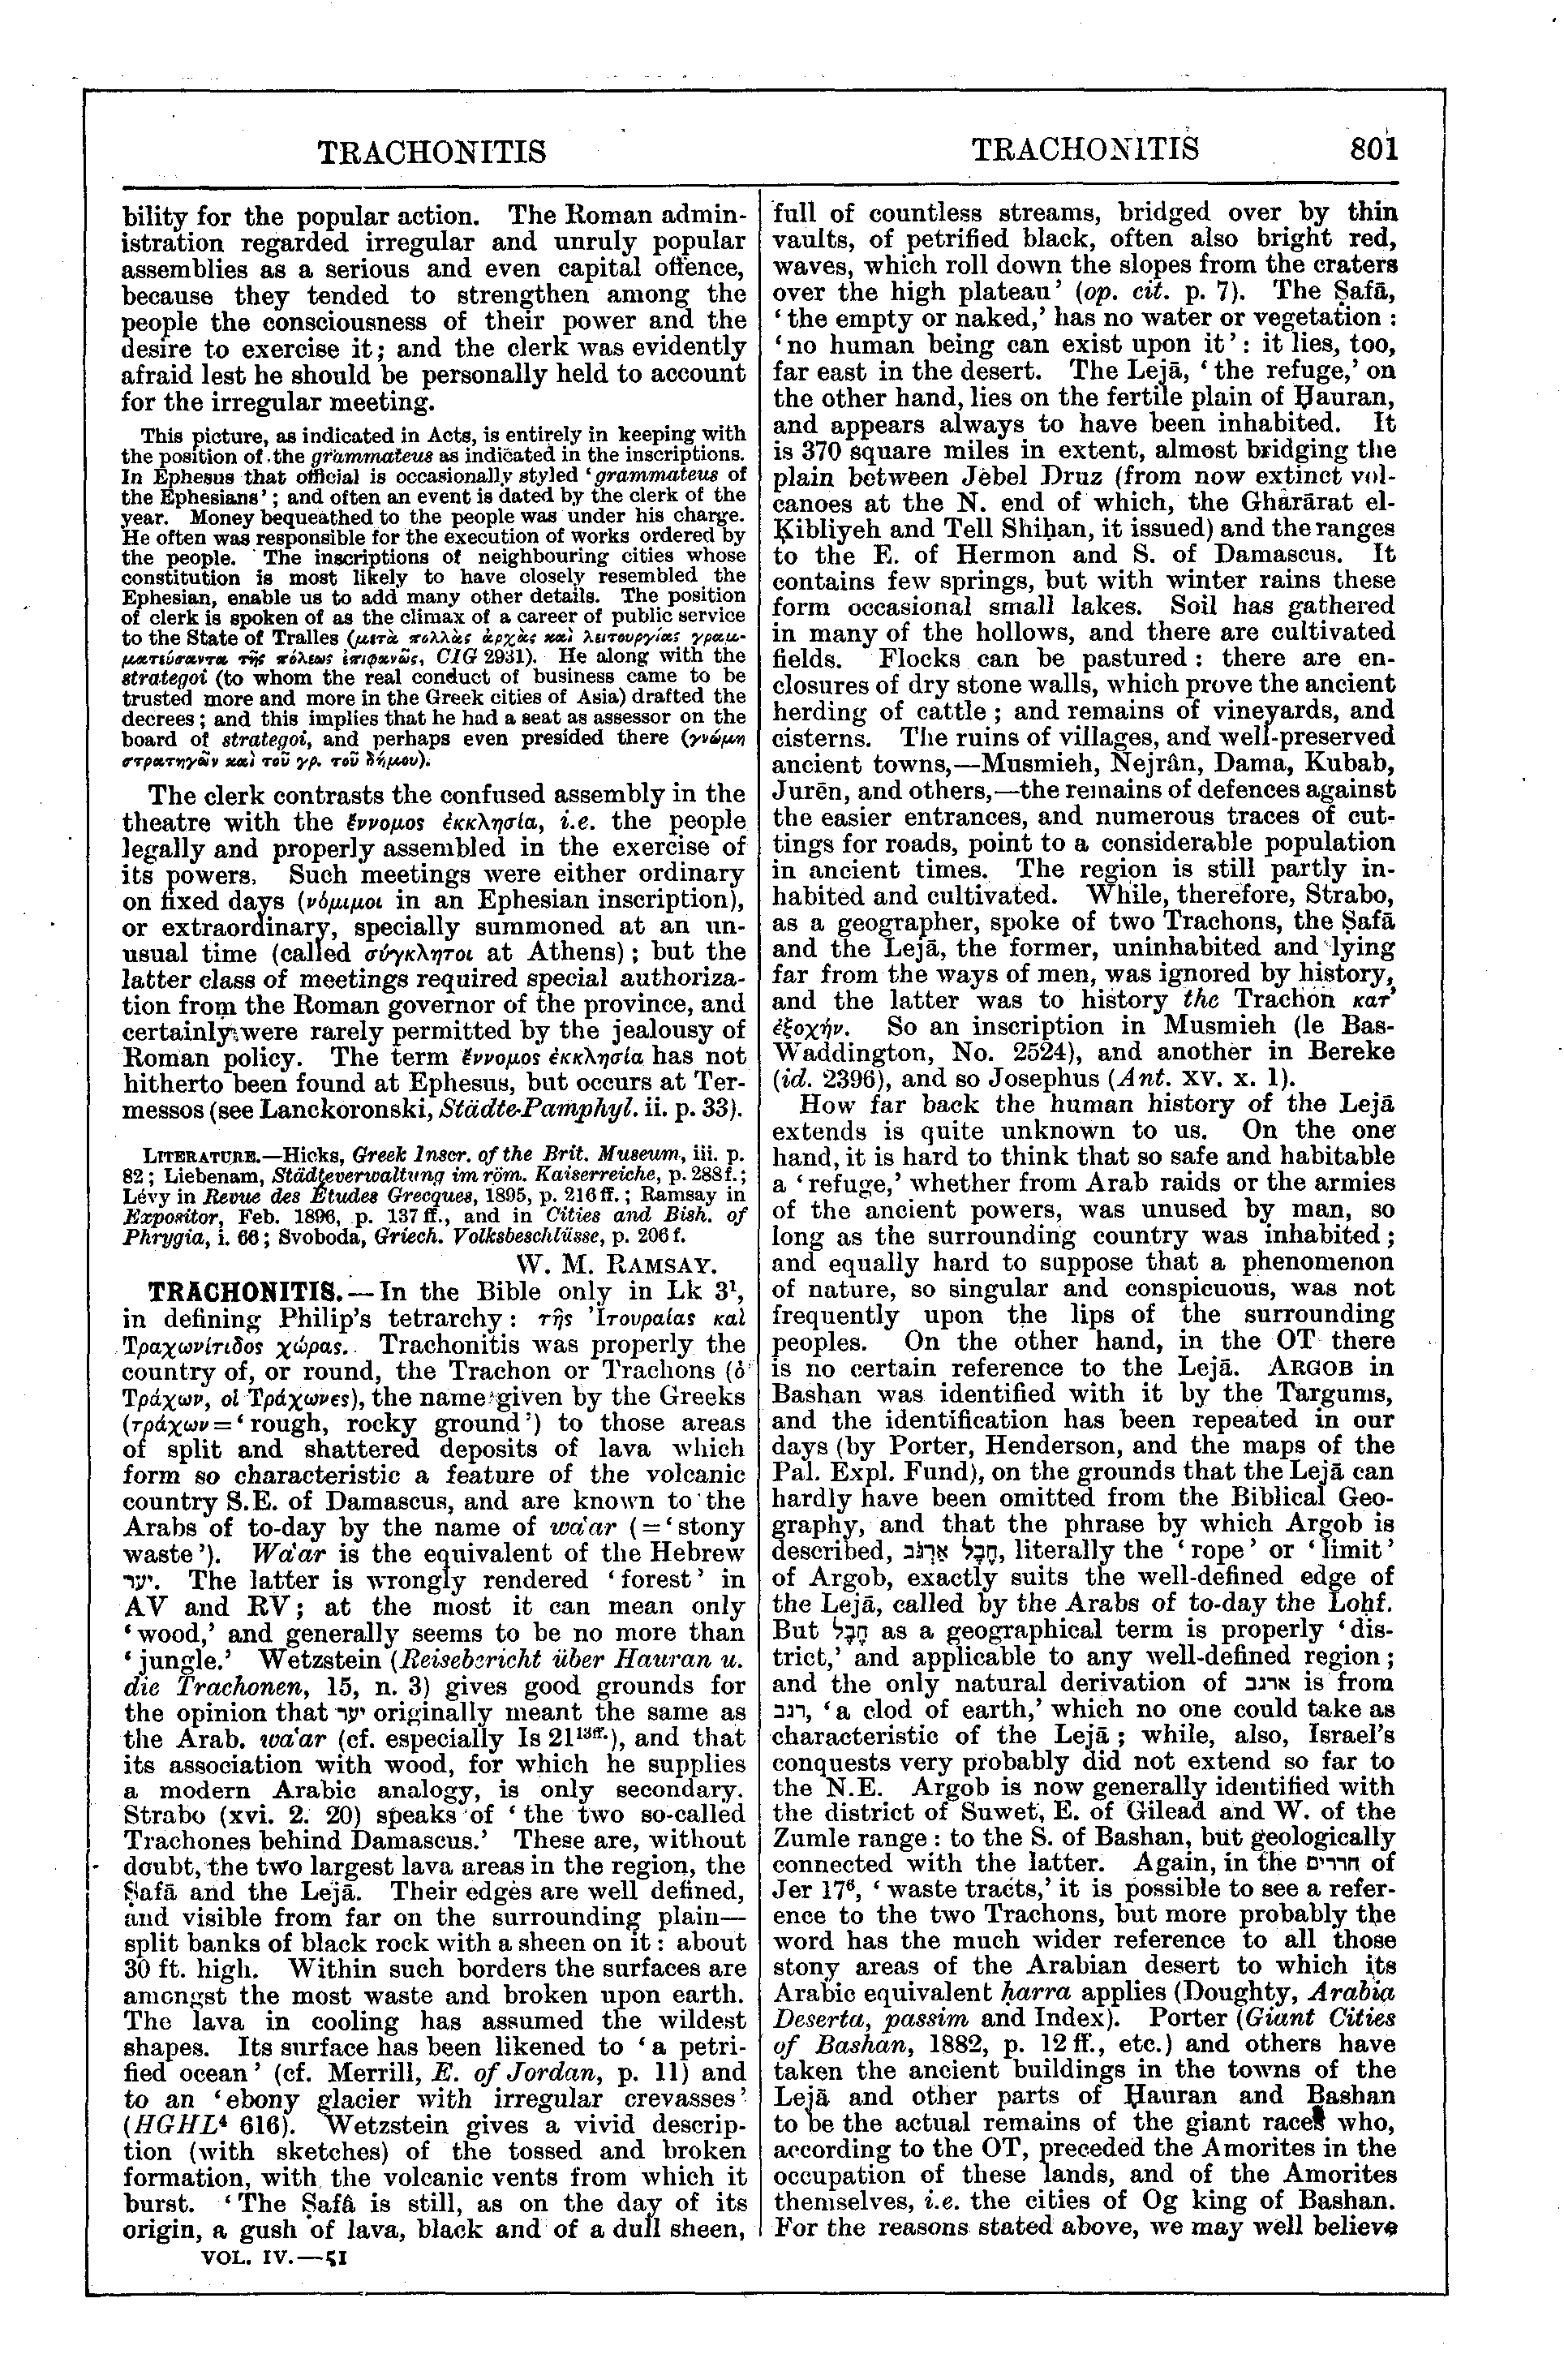 Image of page 801